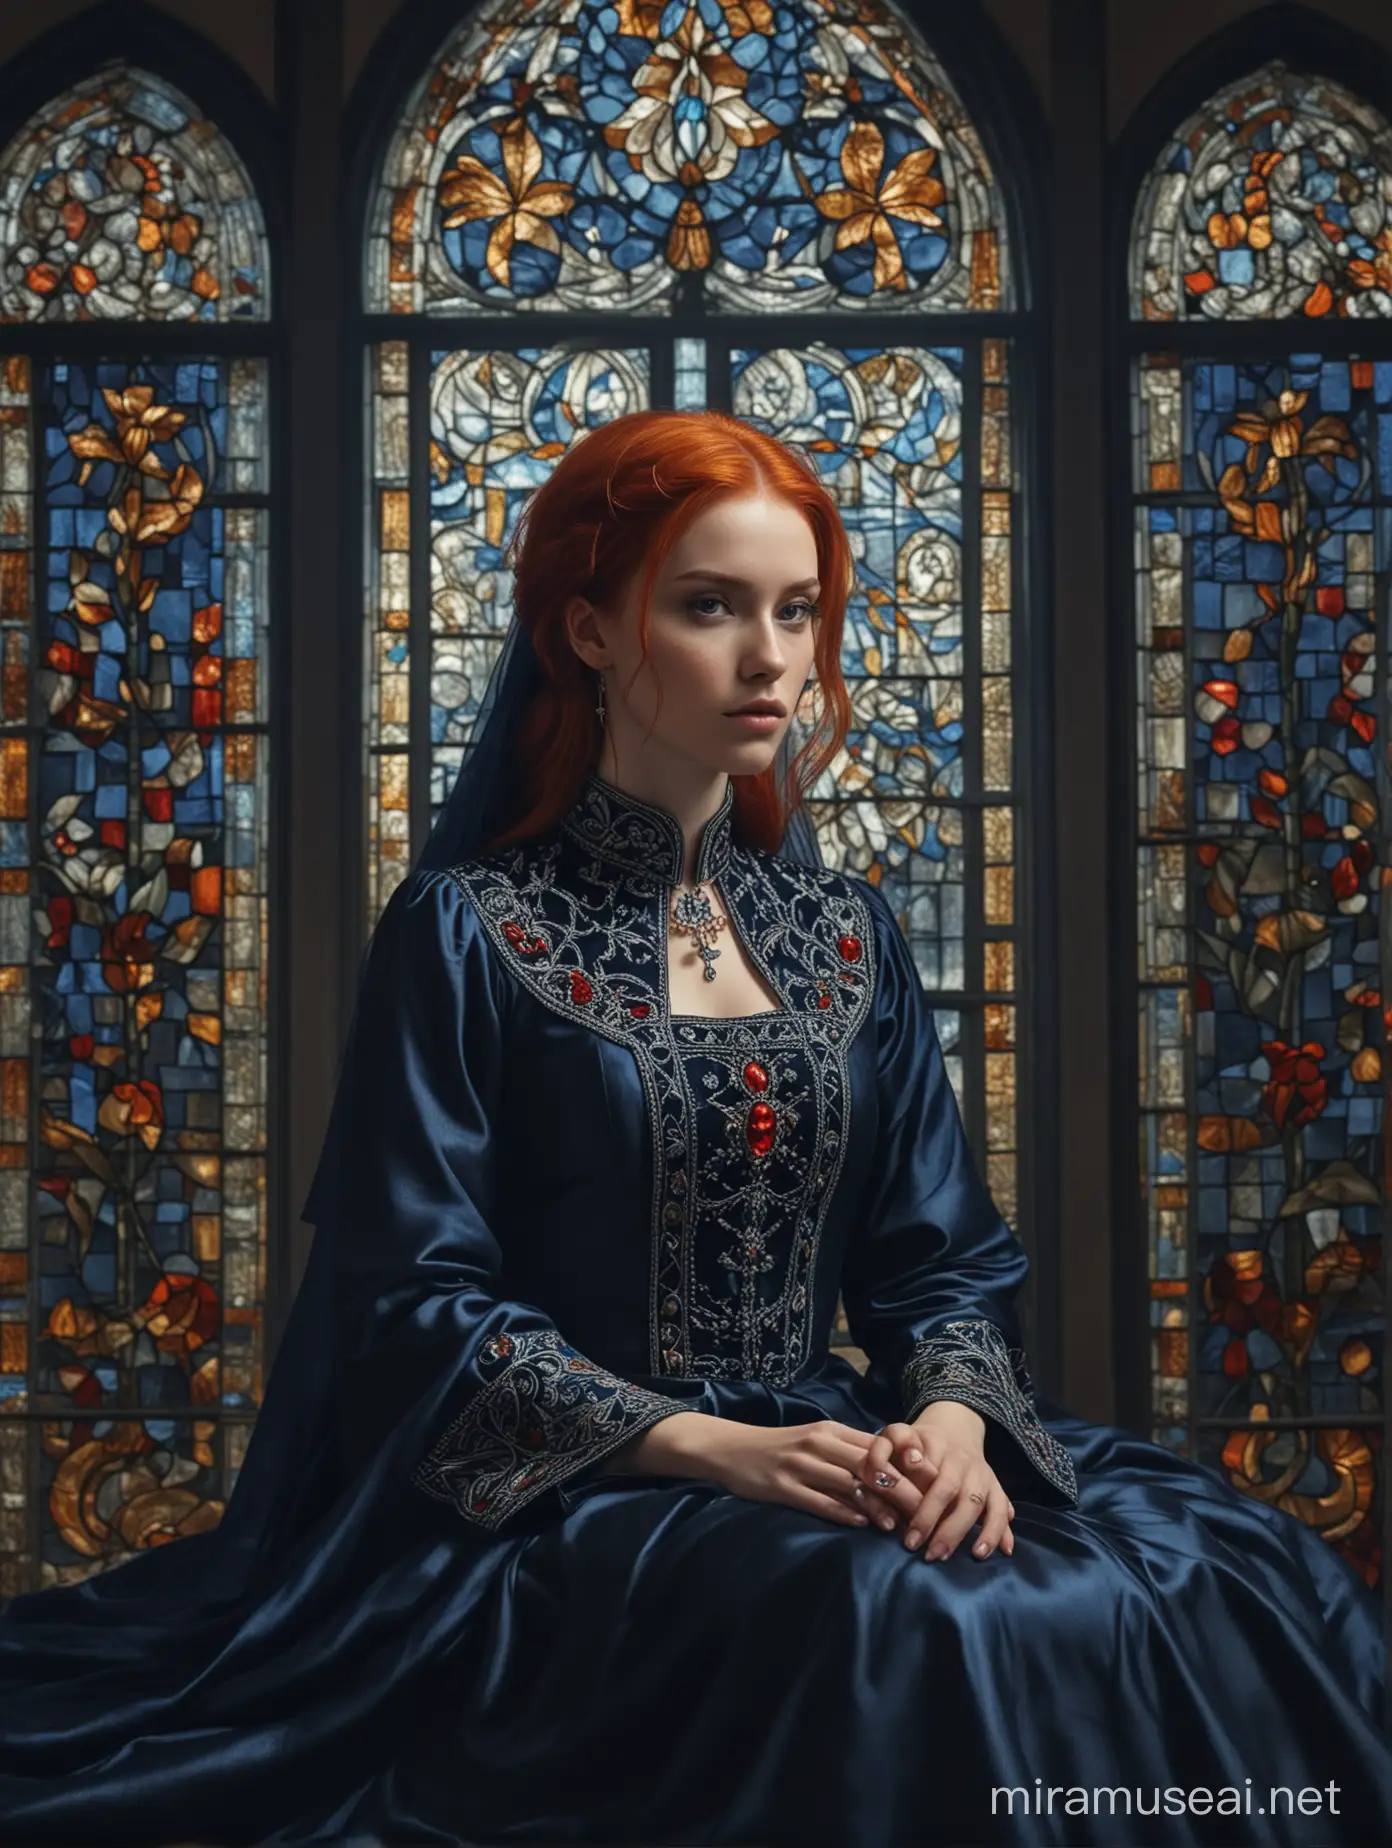 woman with red hair in a blue dress embroidered with sapphires and silver sits on the lap of a young man with long white hair dressed in a black cassock against the background of a night Gothic room with large stained glass windows  fantasy style photorealism cinematic 8K quality high detail pictures full face portrait waist-length portrait full face angle